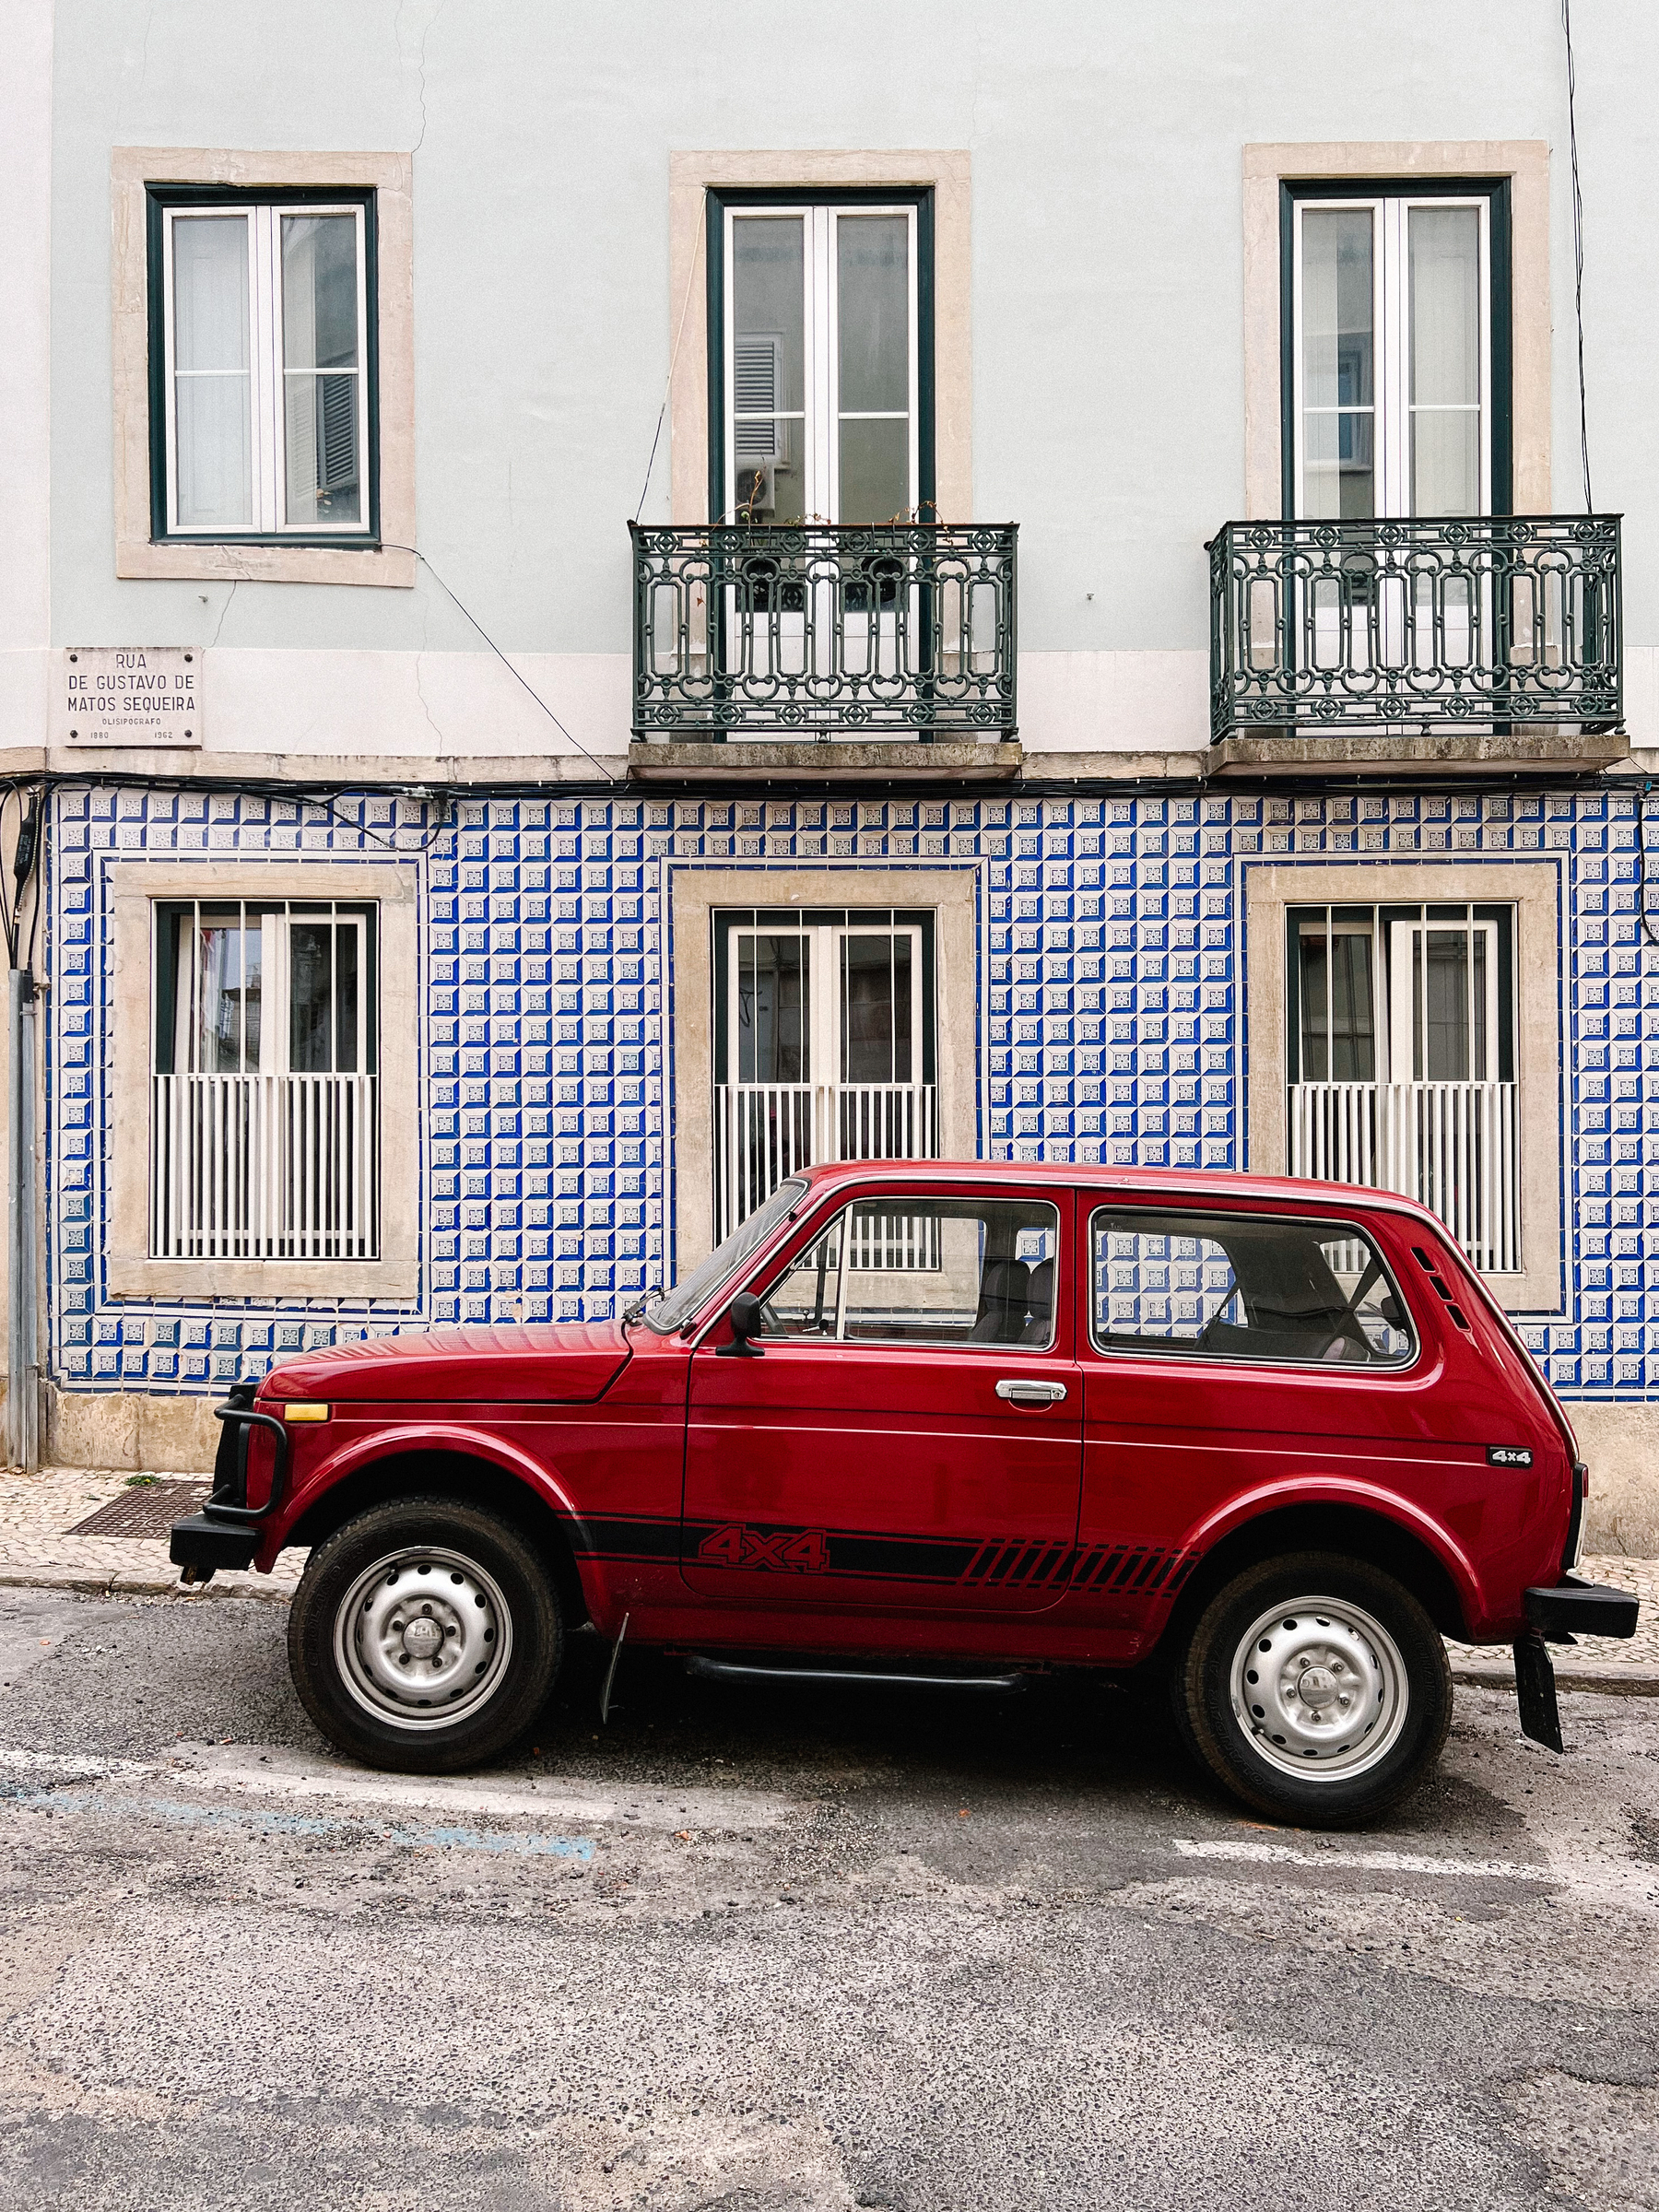 A red Lada Niva parked in front of a tile covered building. 